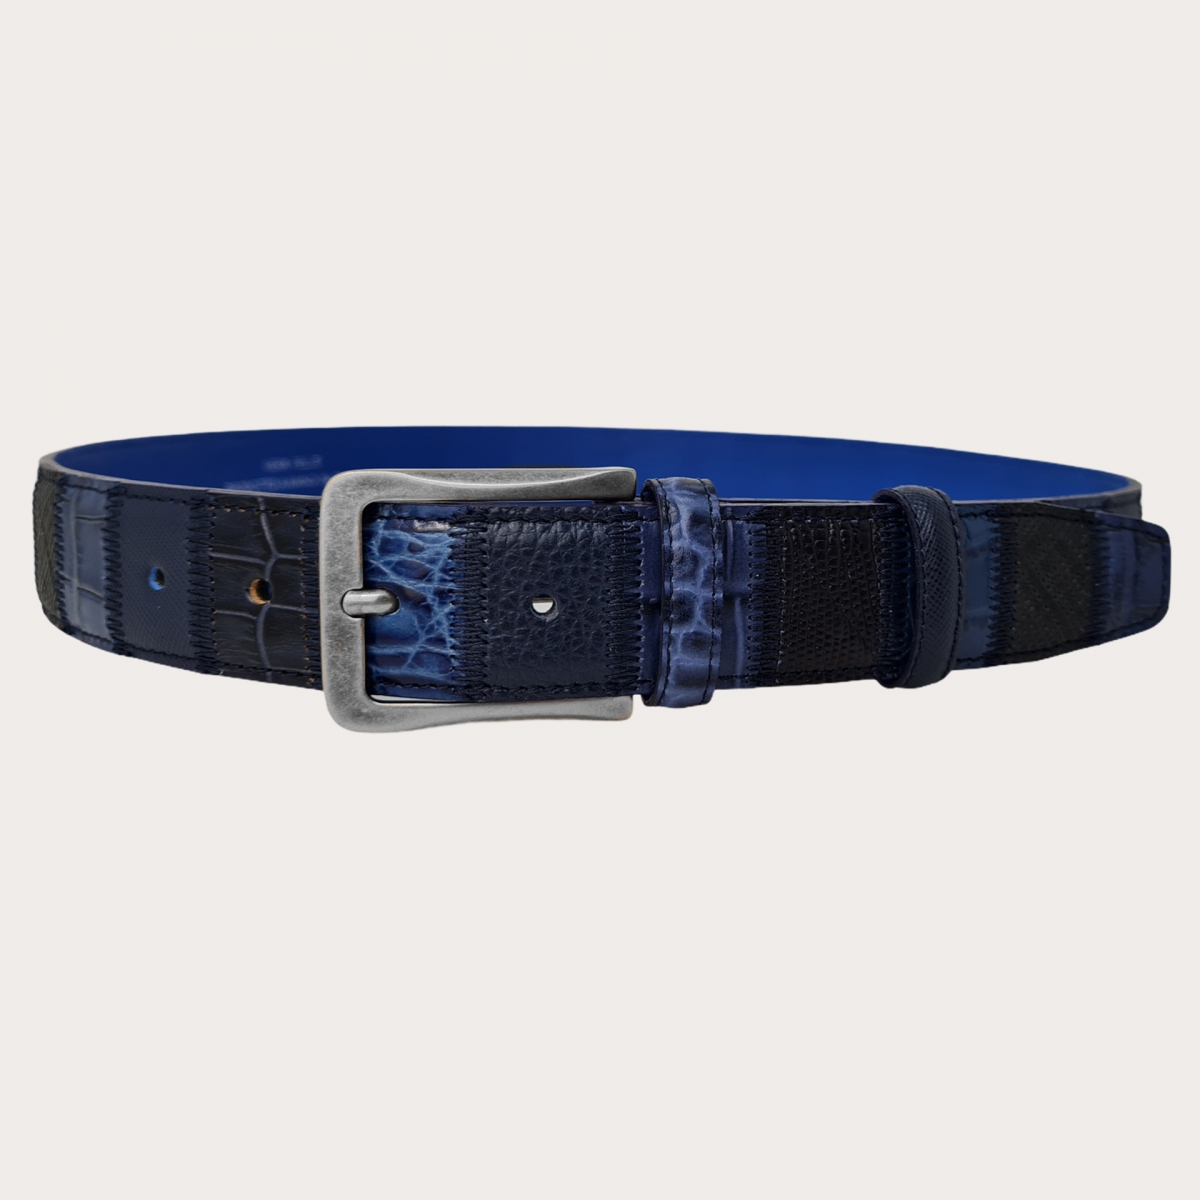 BRUCLE Exclusive patchwork belt in shades of blue